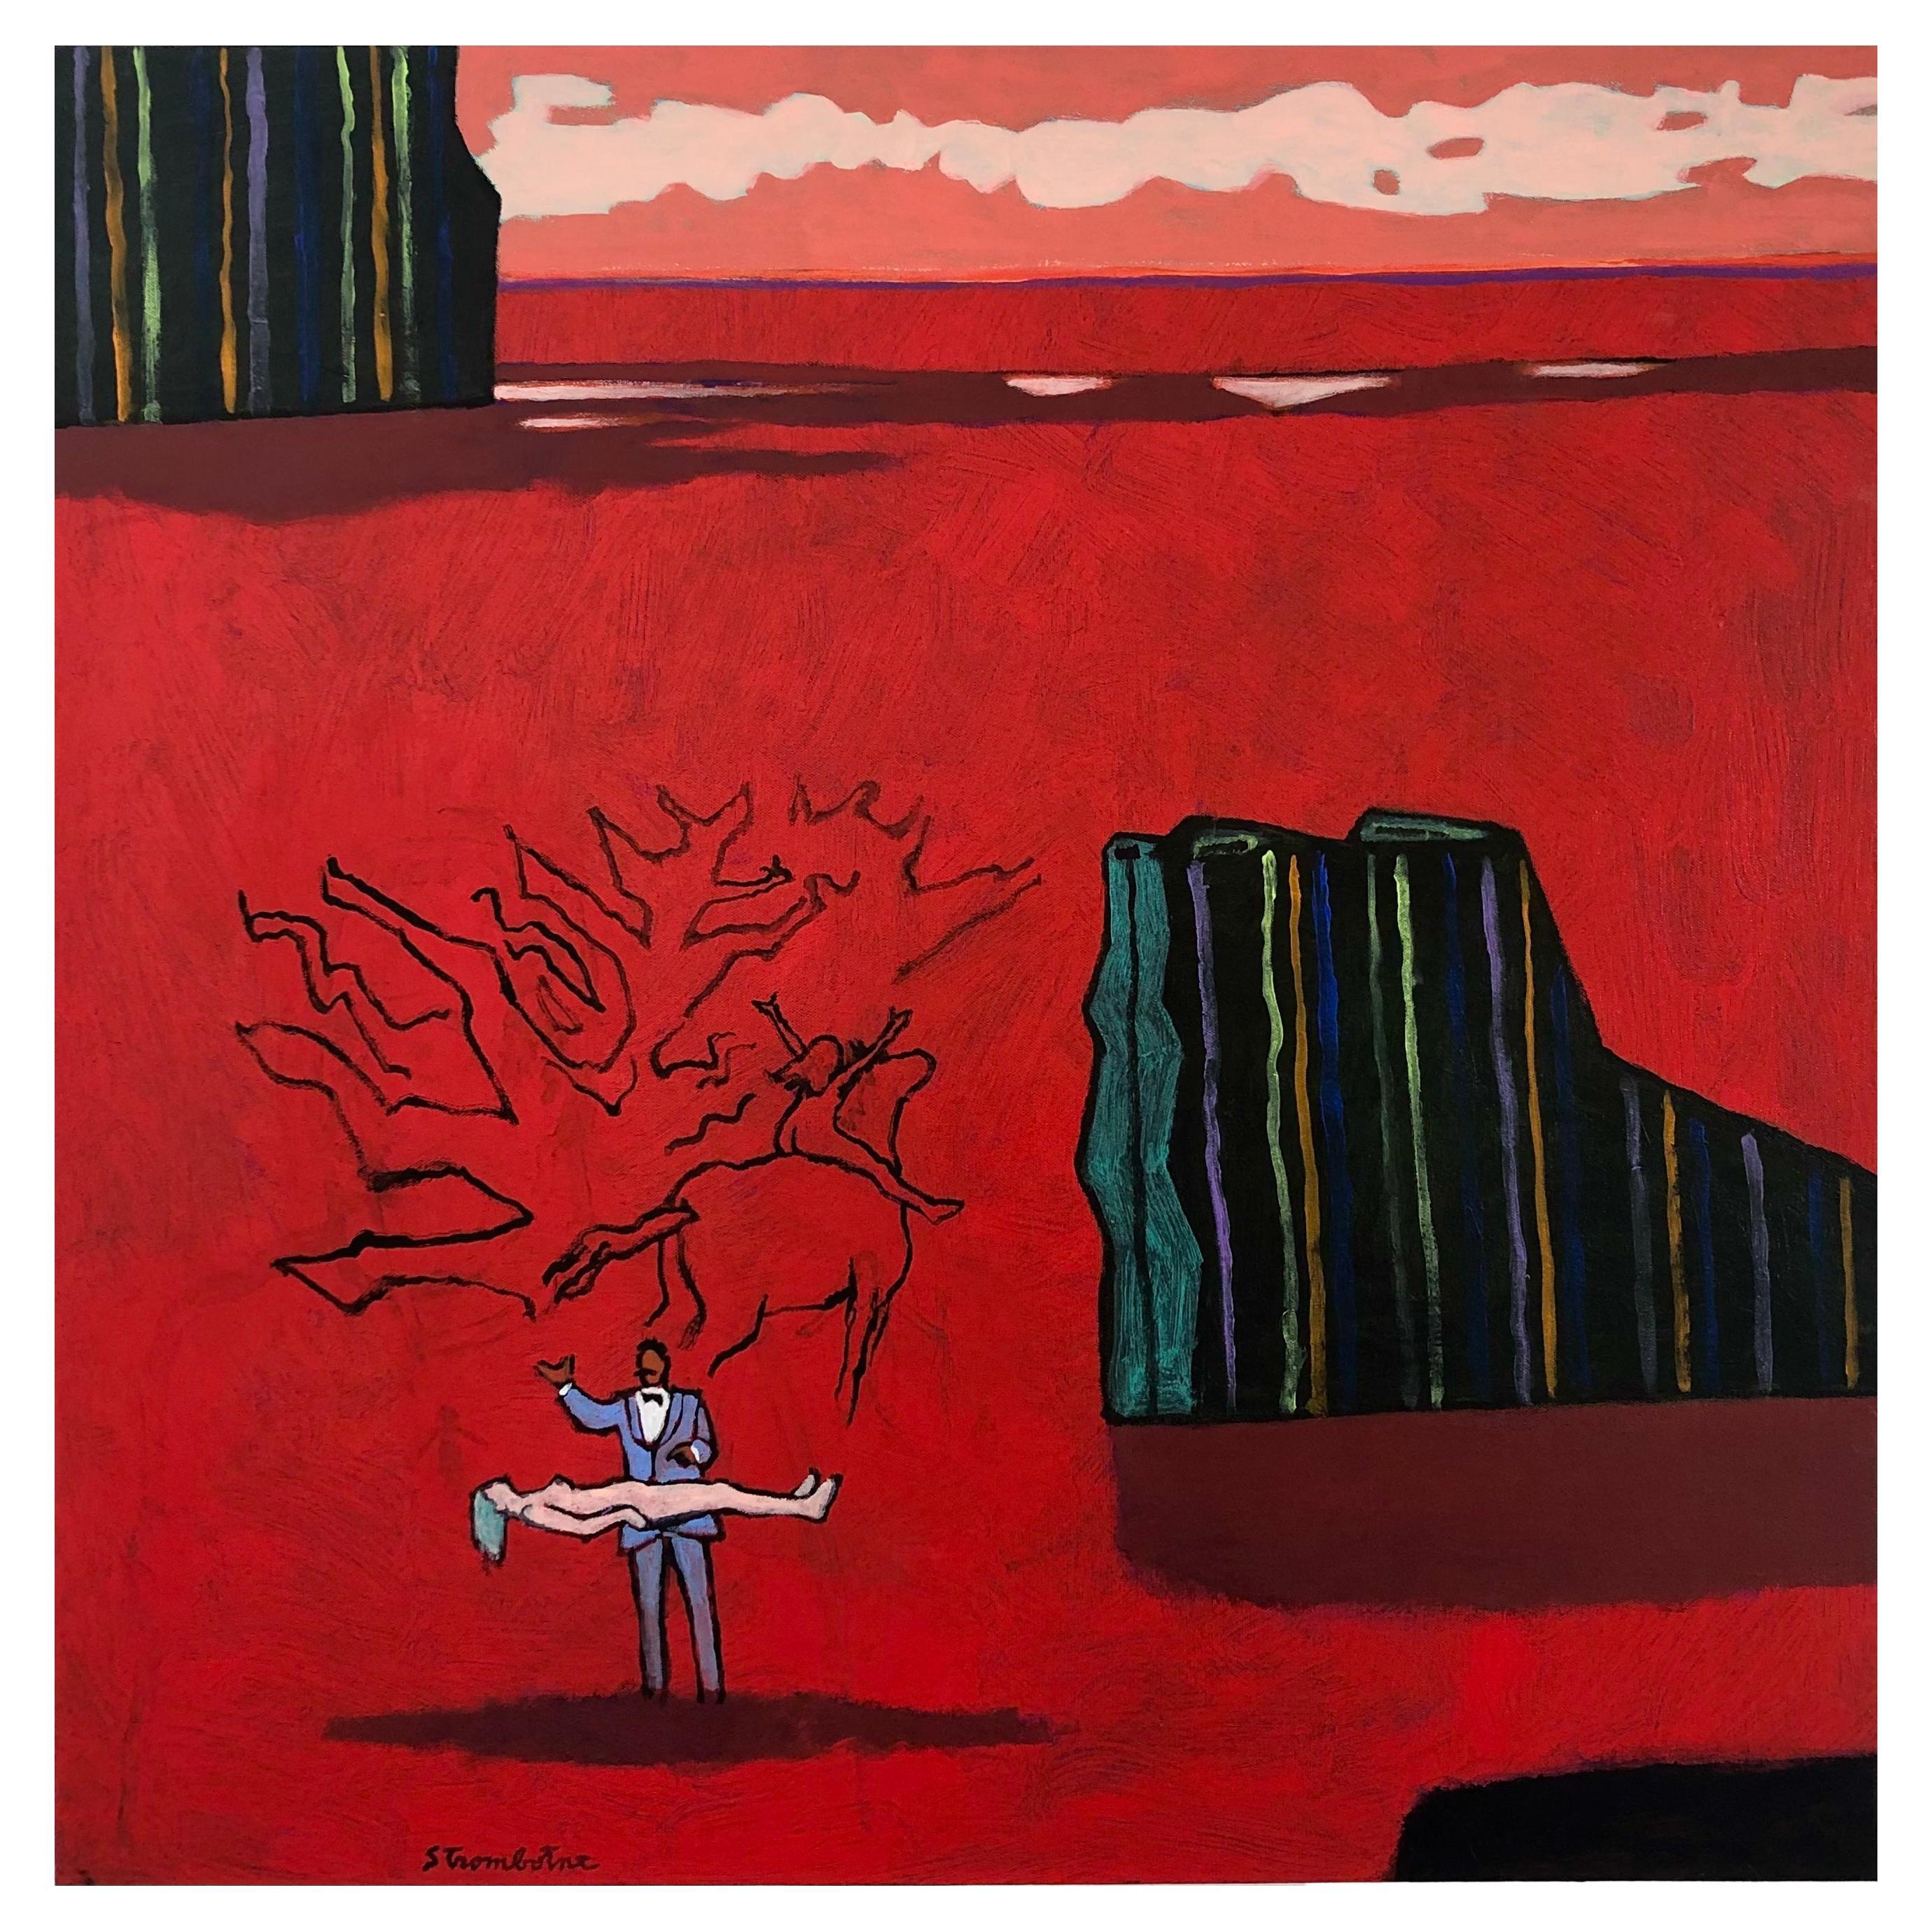 James Strombotne "Red Sea” Acrylic on Canvas Painting